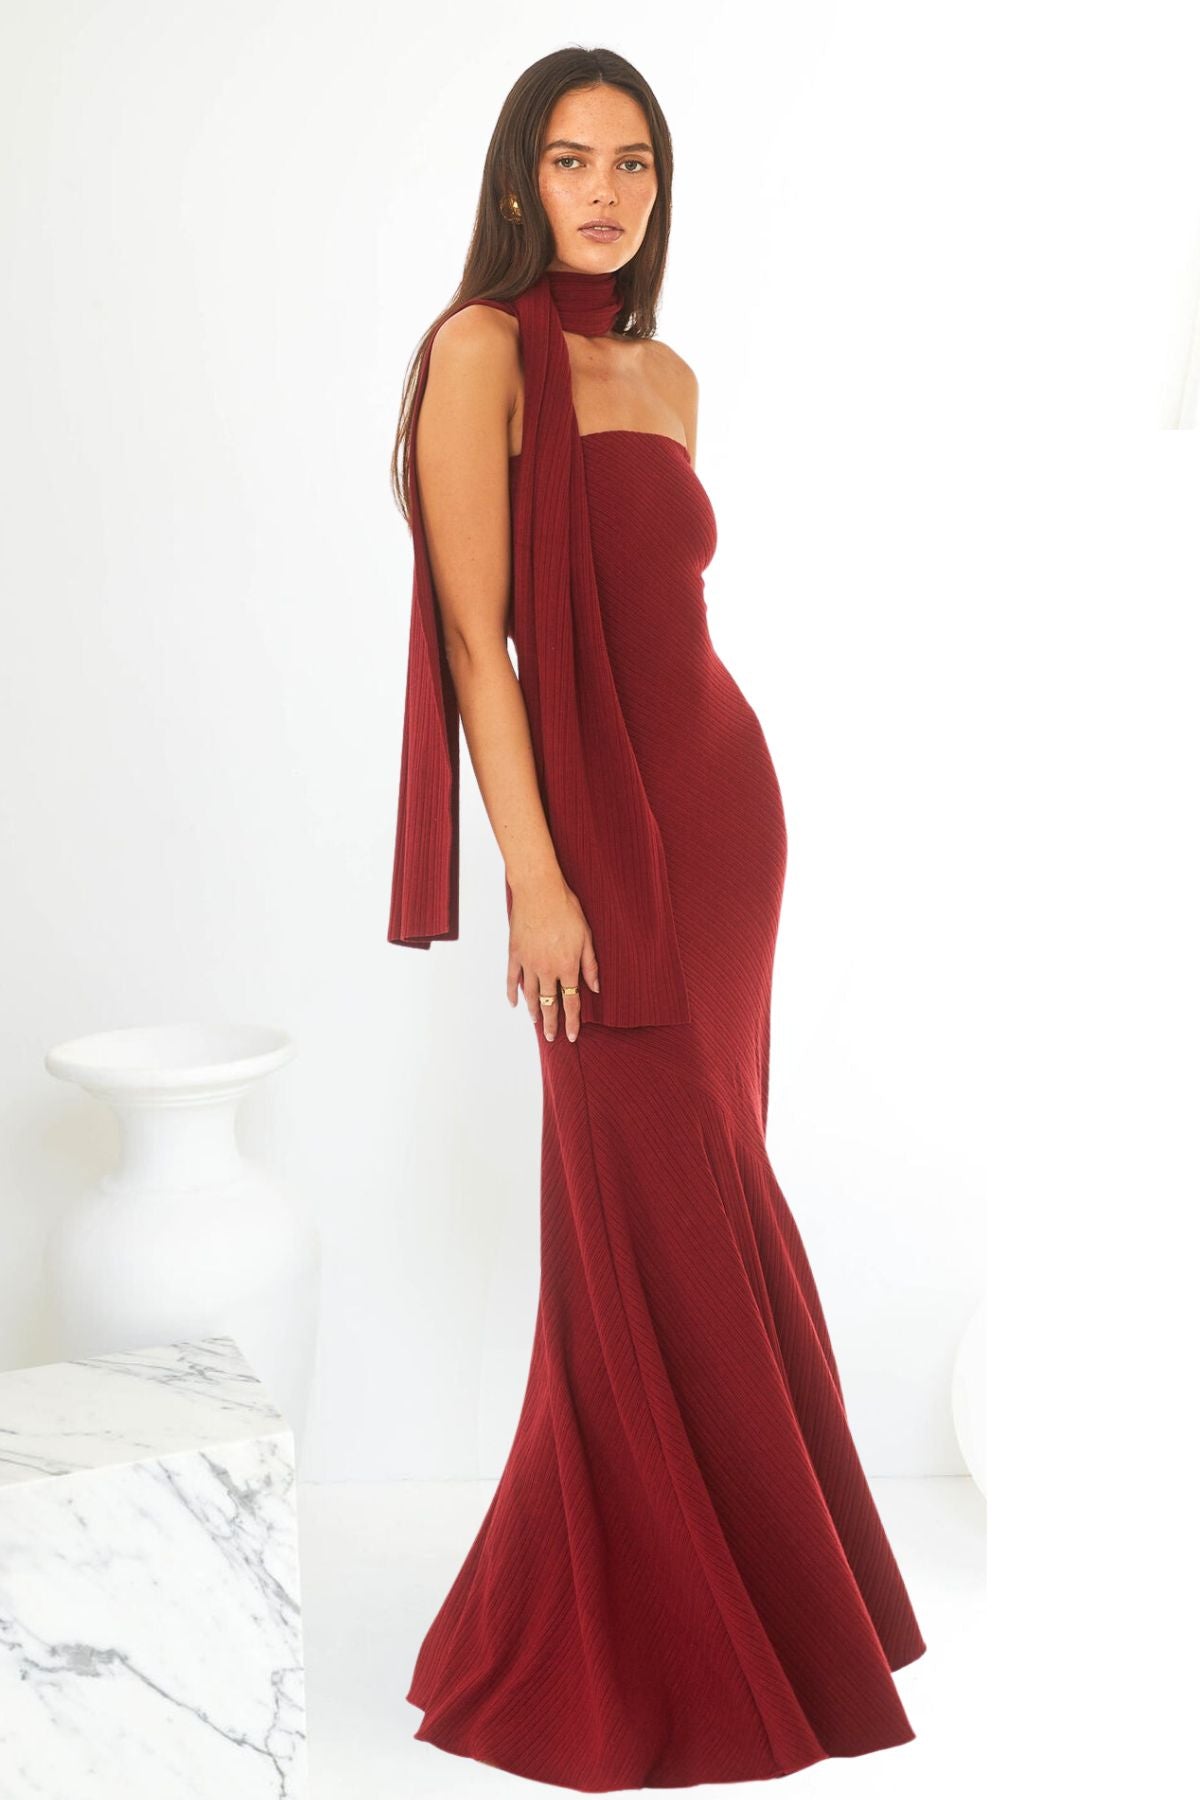 Burgundy Wedding Guests Dresses For Hire - Dress For A Night